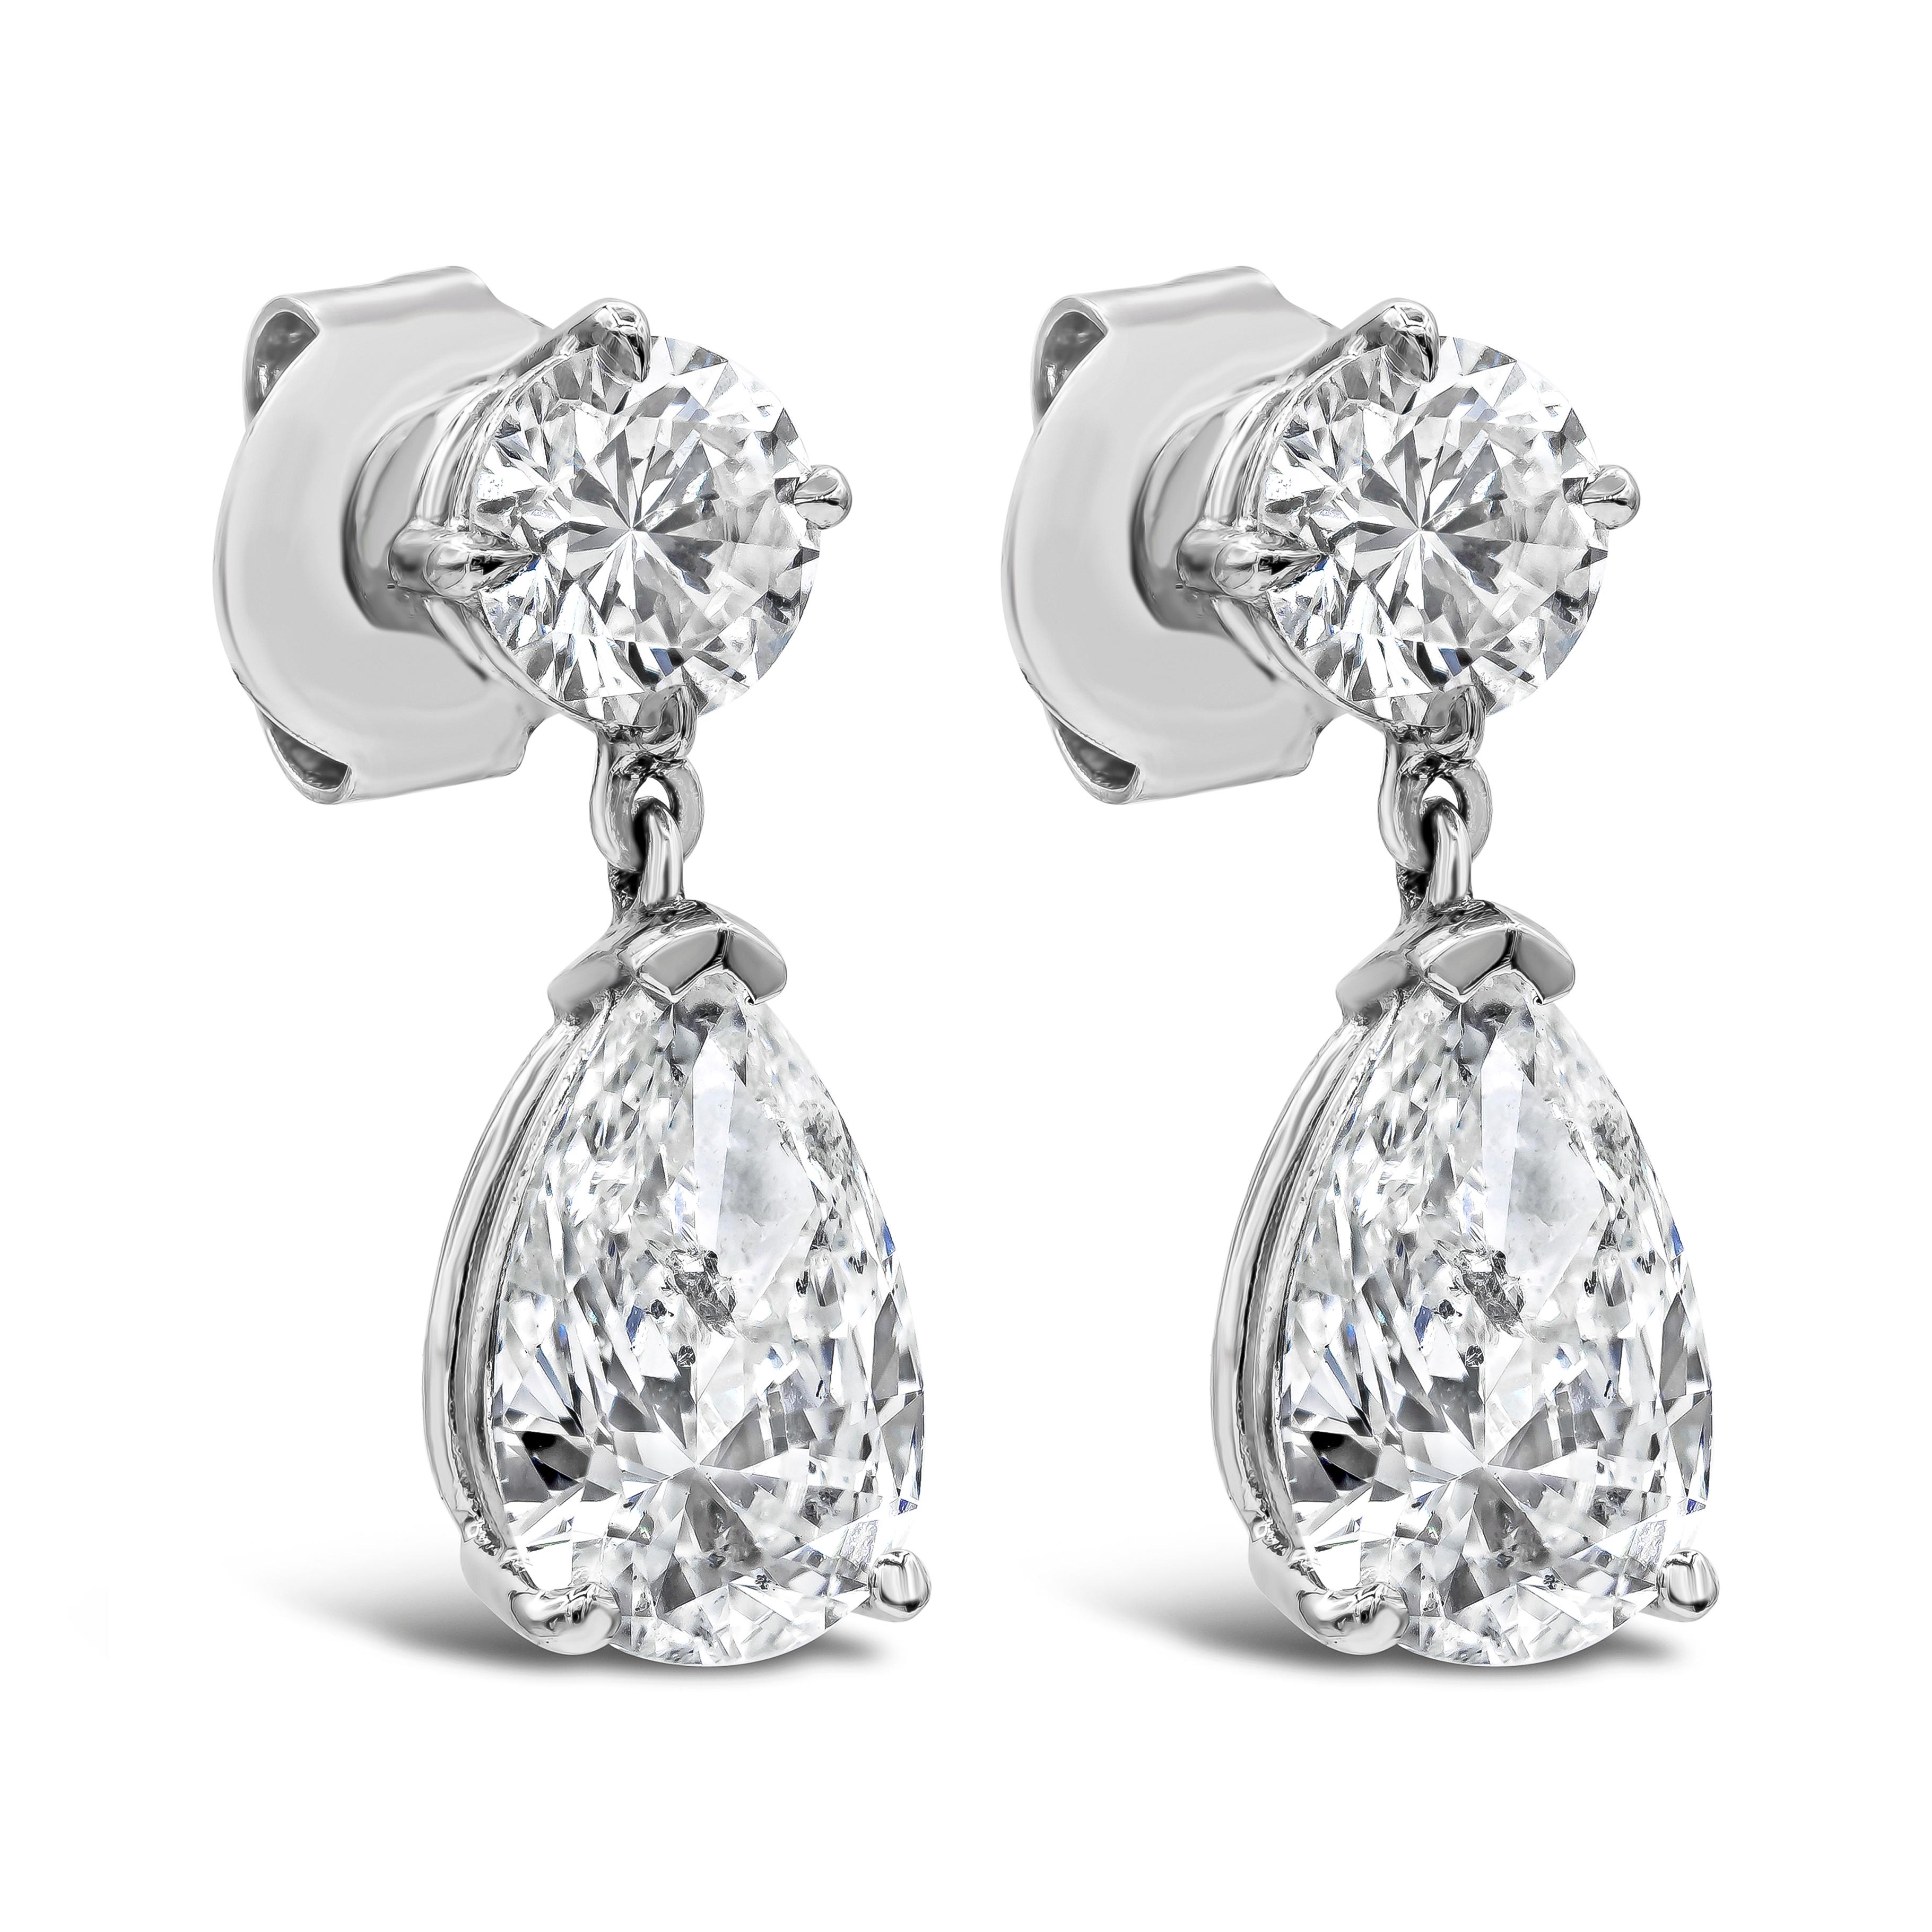 A classy pair of dangle earrings featuring a pear shape diamond drop suspended on a round brilliant diamond. Pear shape diamonds weigh 2.31 carats and are approximately D color, I1 clarity. Round diamonds weigh 0.97 carats total. Made in 14k white